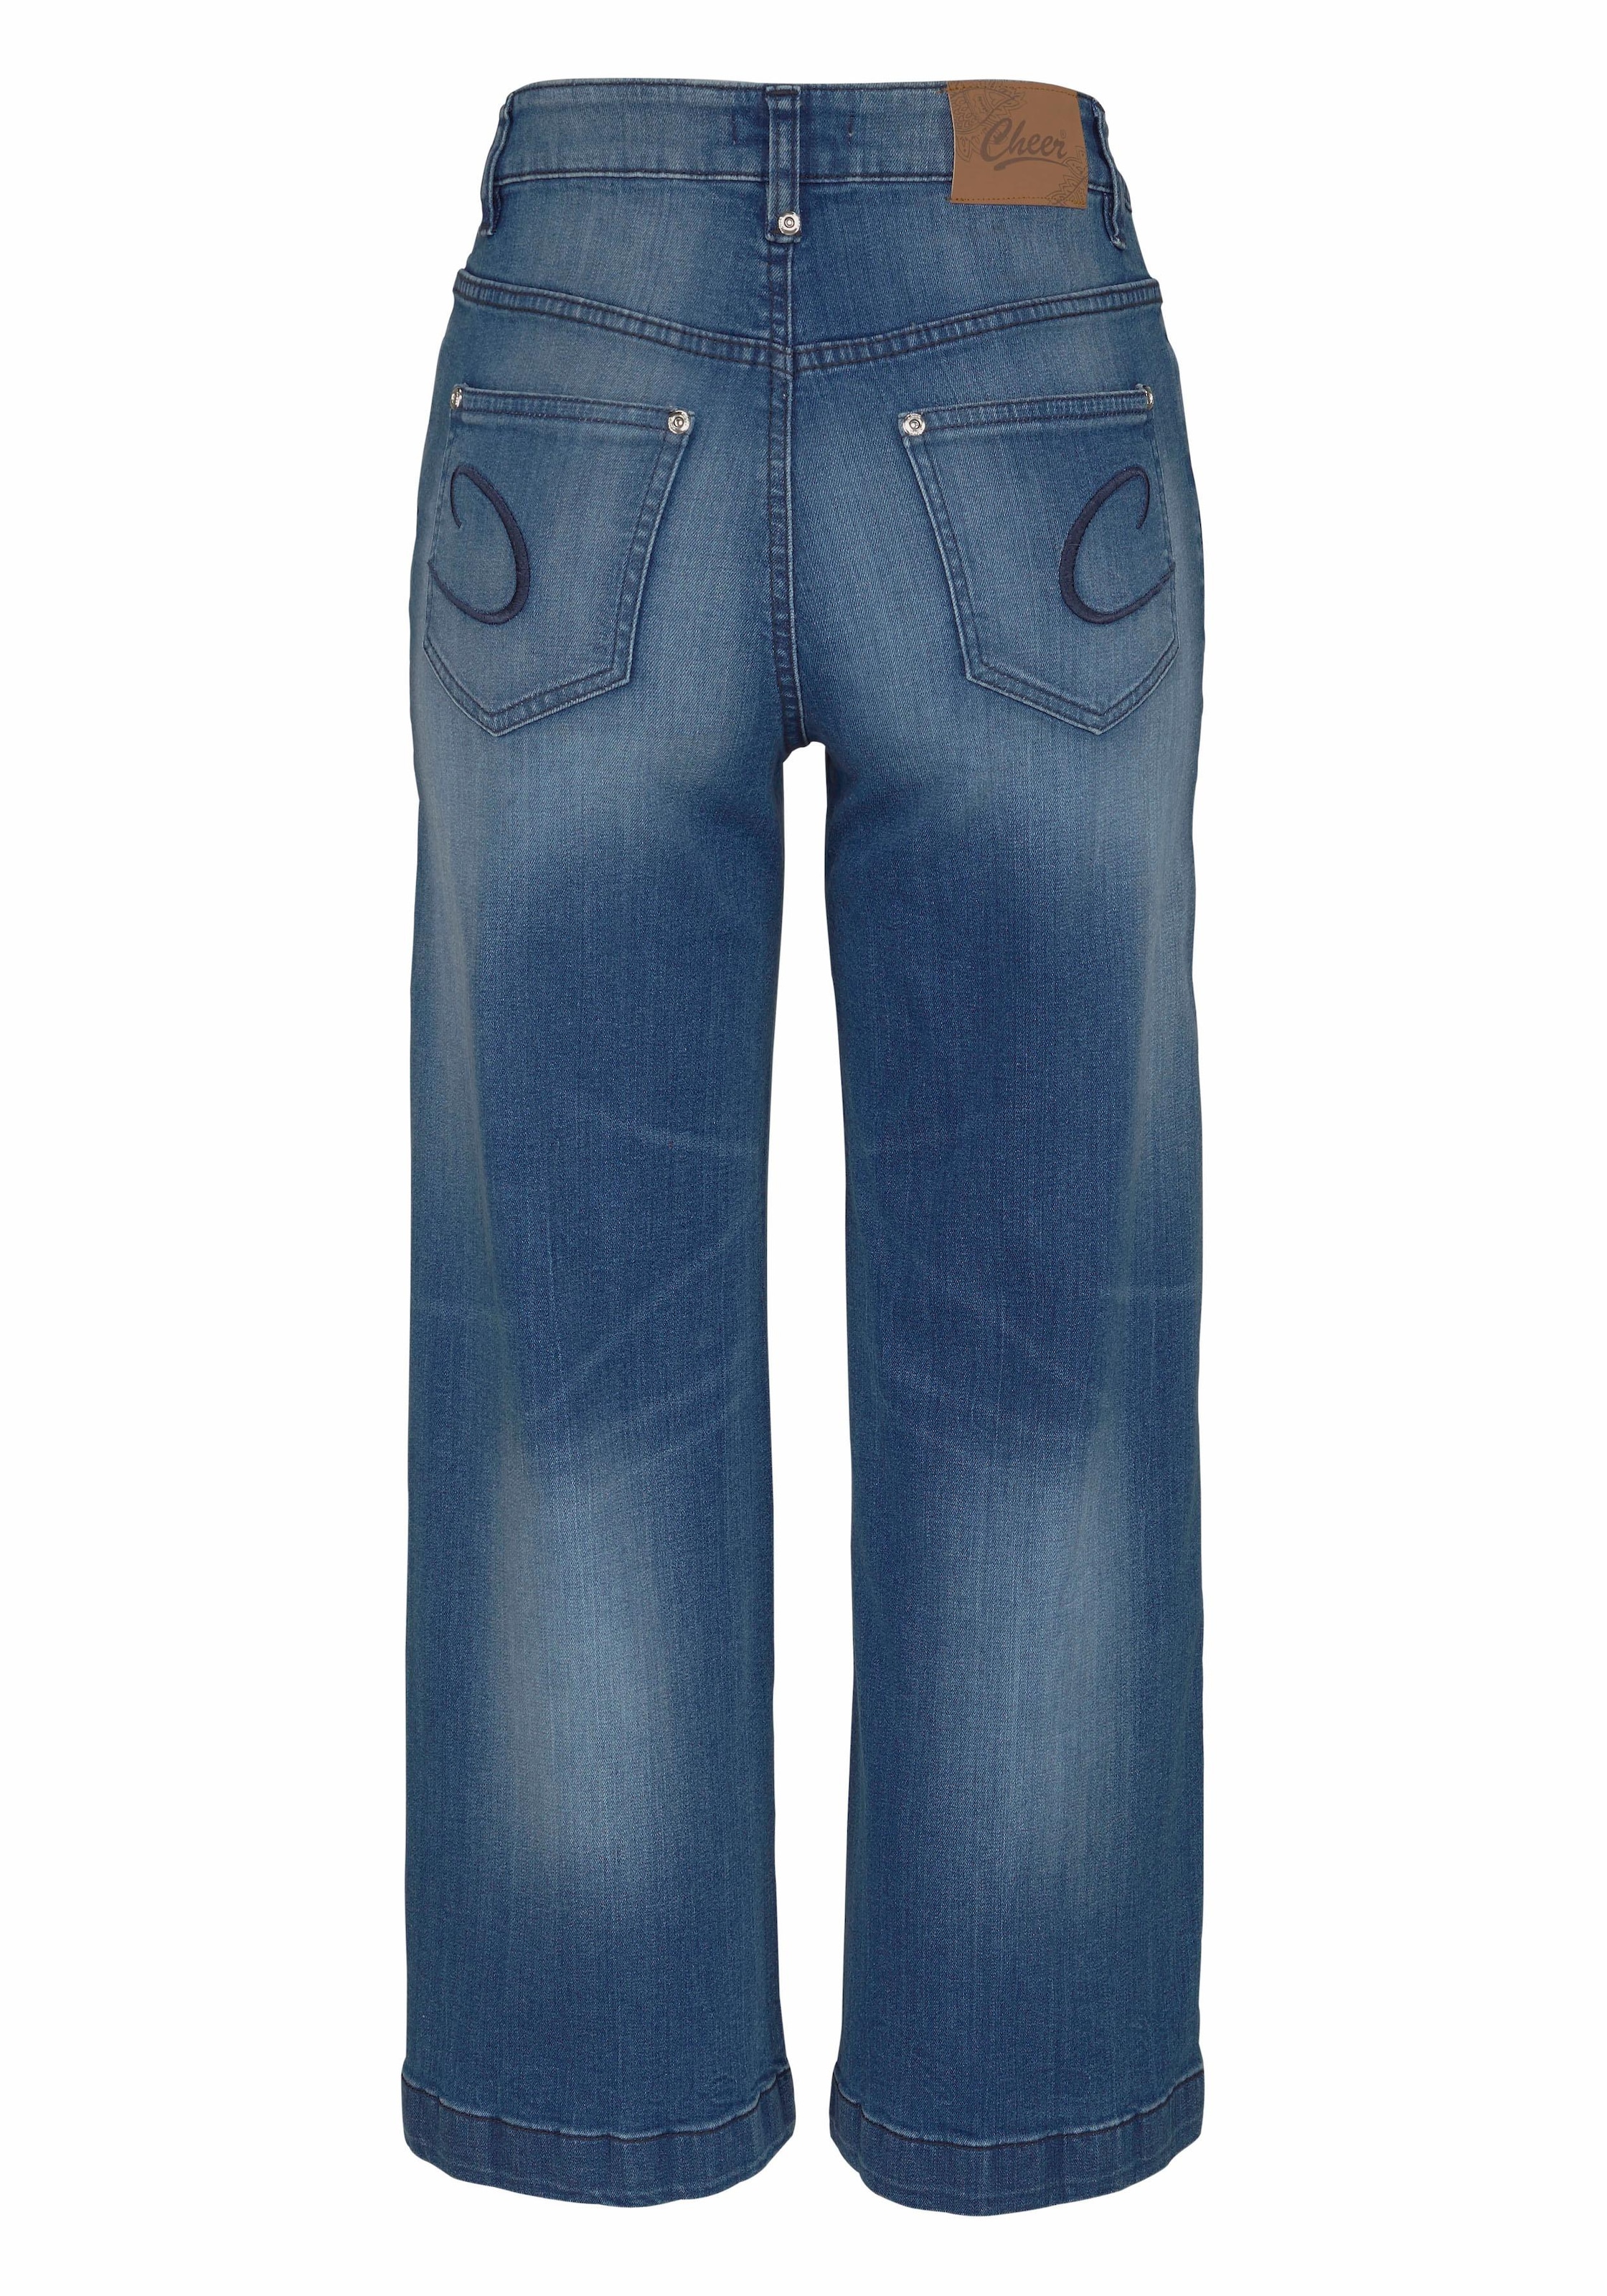 in 7/8-Jeans, Aniston Used-Waschung shoppen CASUAL